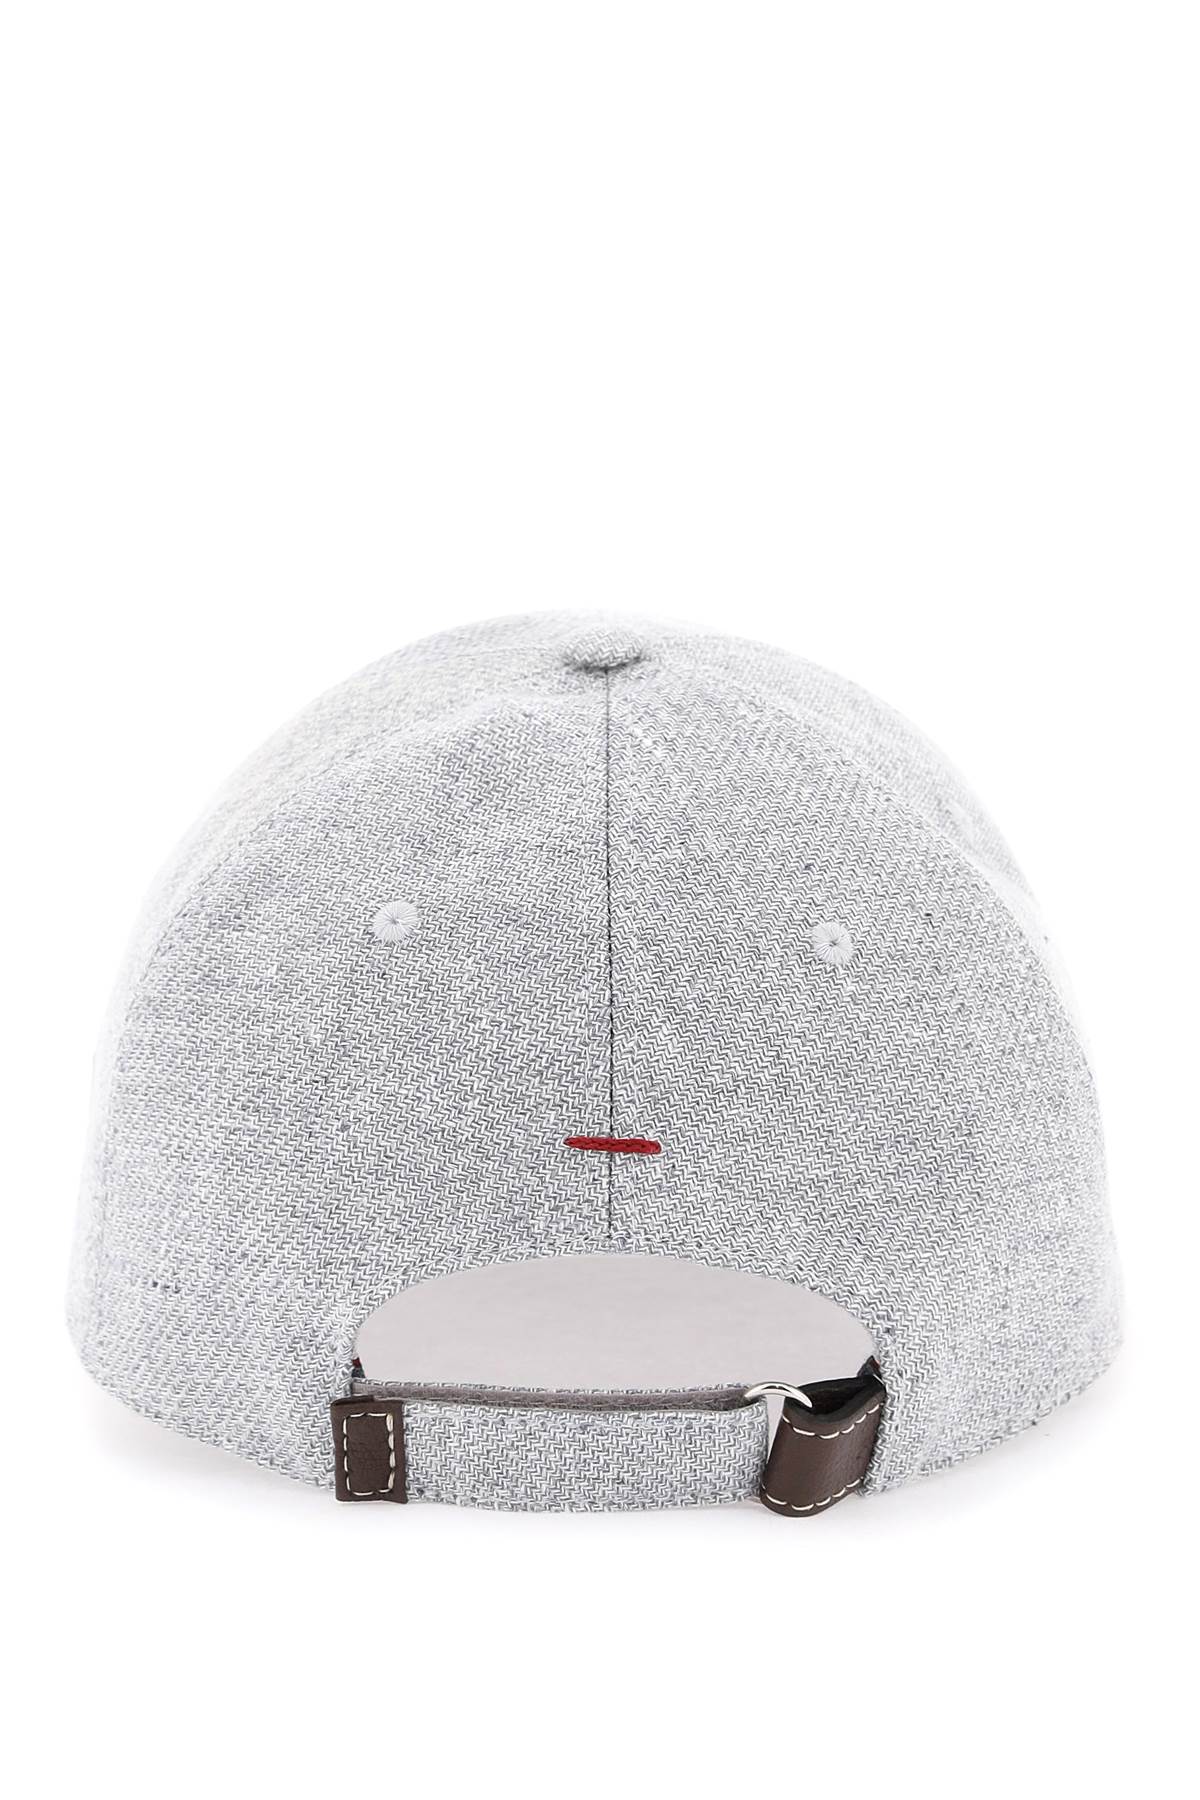 Brunello Cucinelli Replace With Double Quotediagonal Linen*** Wool And Silk Baseball Cap   Grey